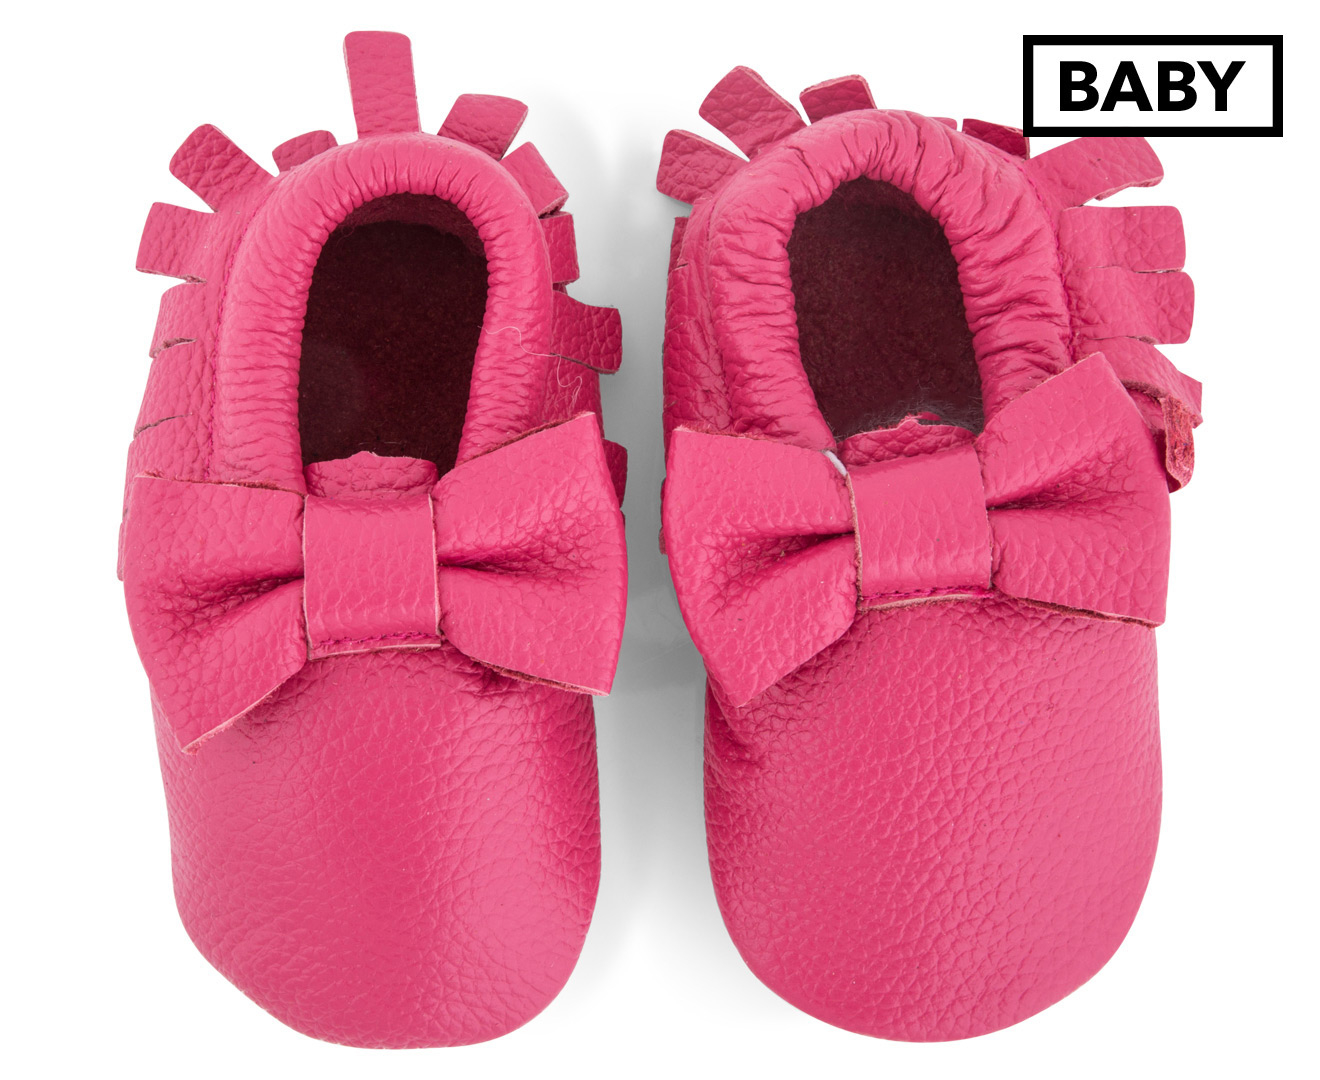 Angel Fit Moccasins With Bow - Hot Pink